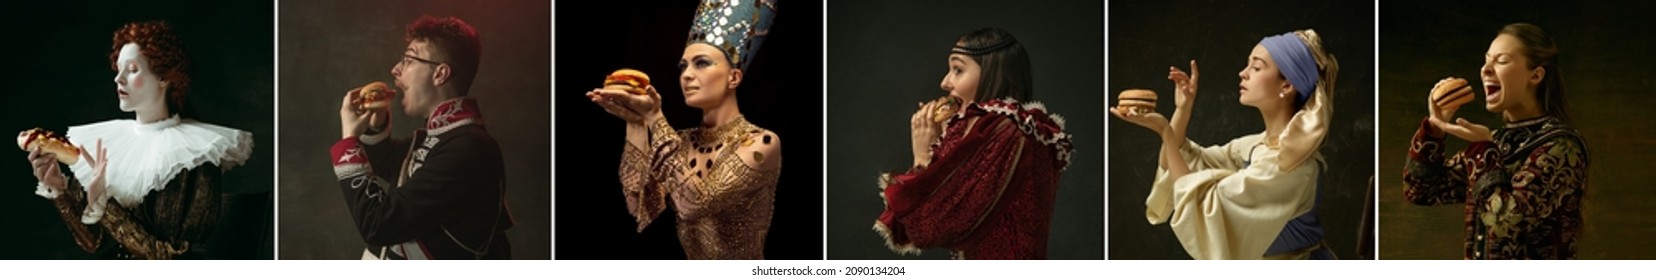 Fast food. Medieval women as a royalty persons from famous artworks in vintage clothing on dark background. Concept of comparison of eras, modernity and renaissance, baroque style. Creative collage. - Shutterstock ID 2090134204